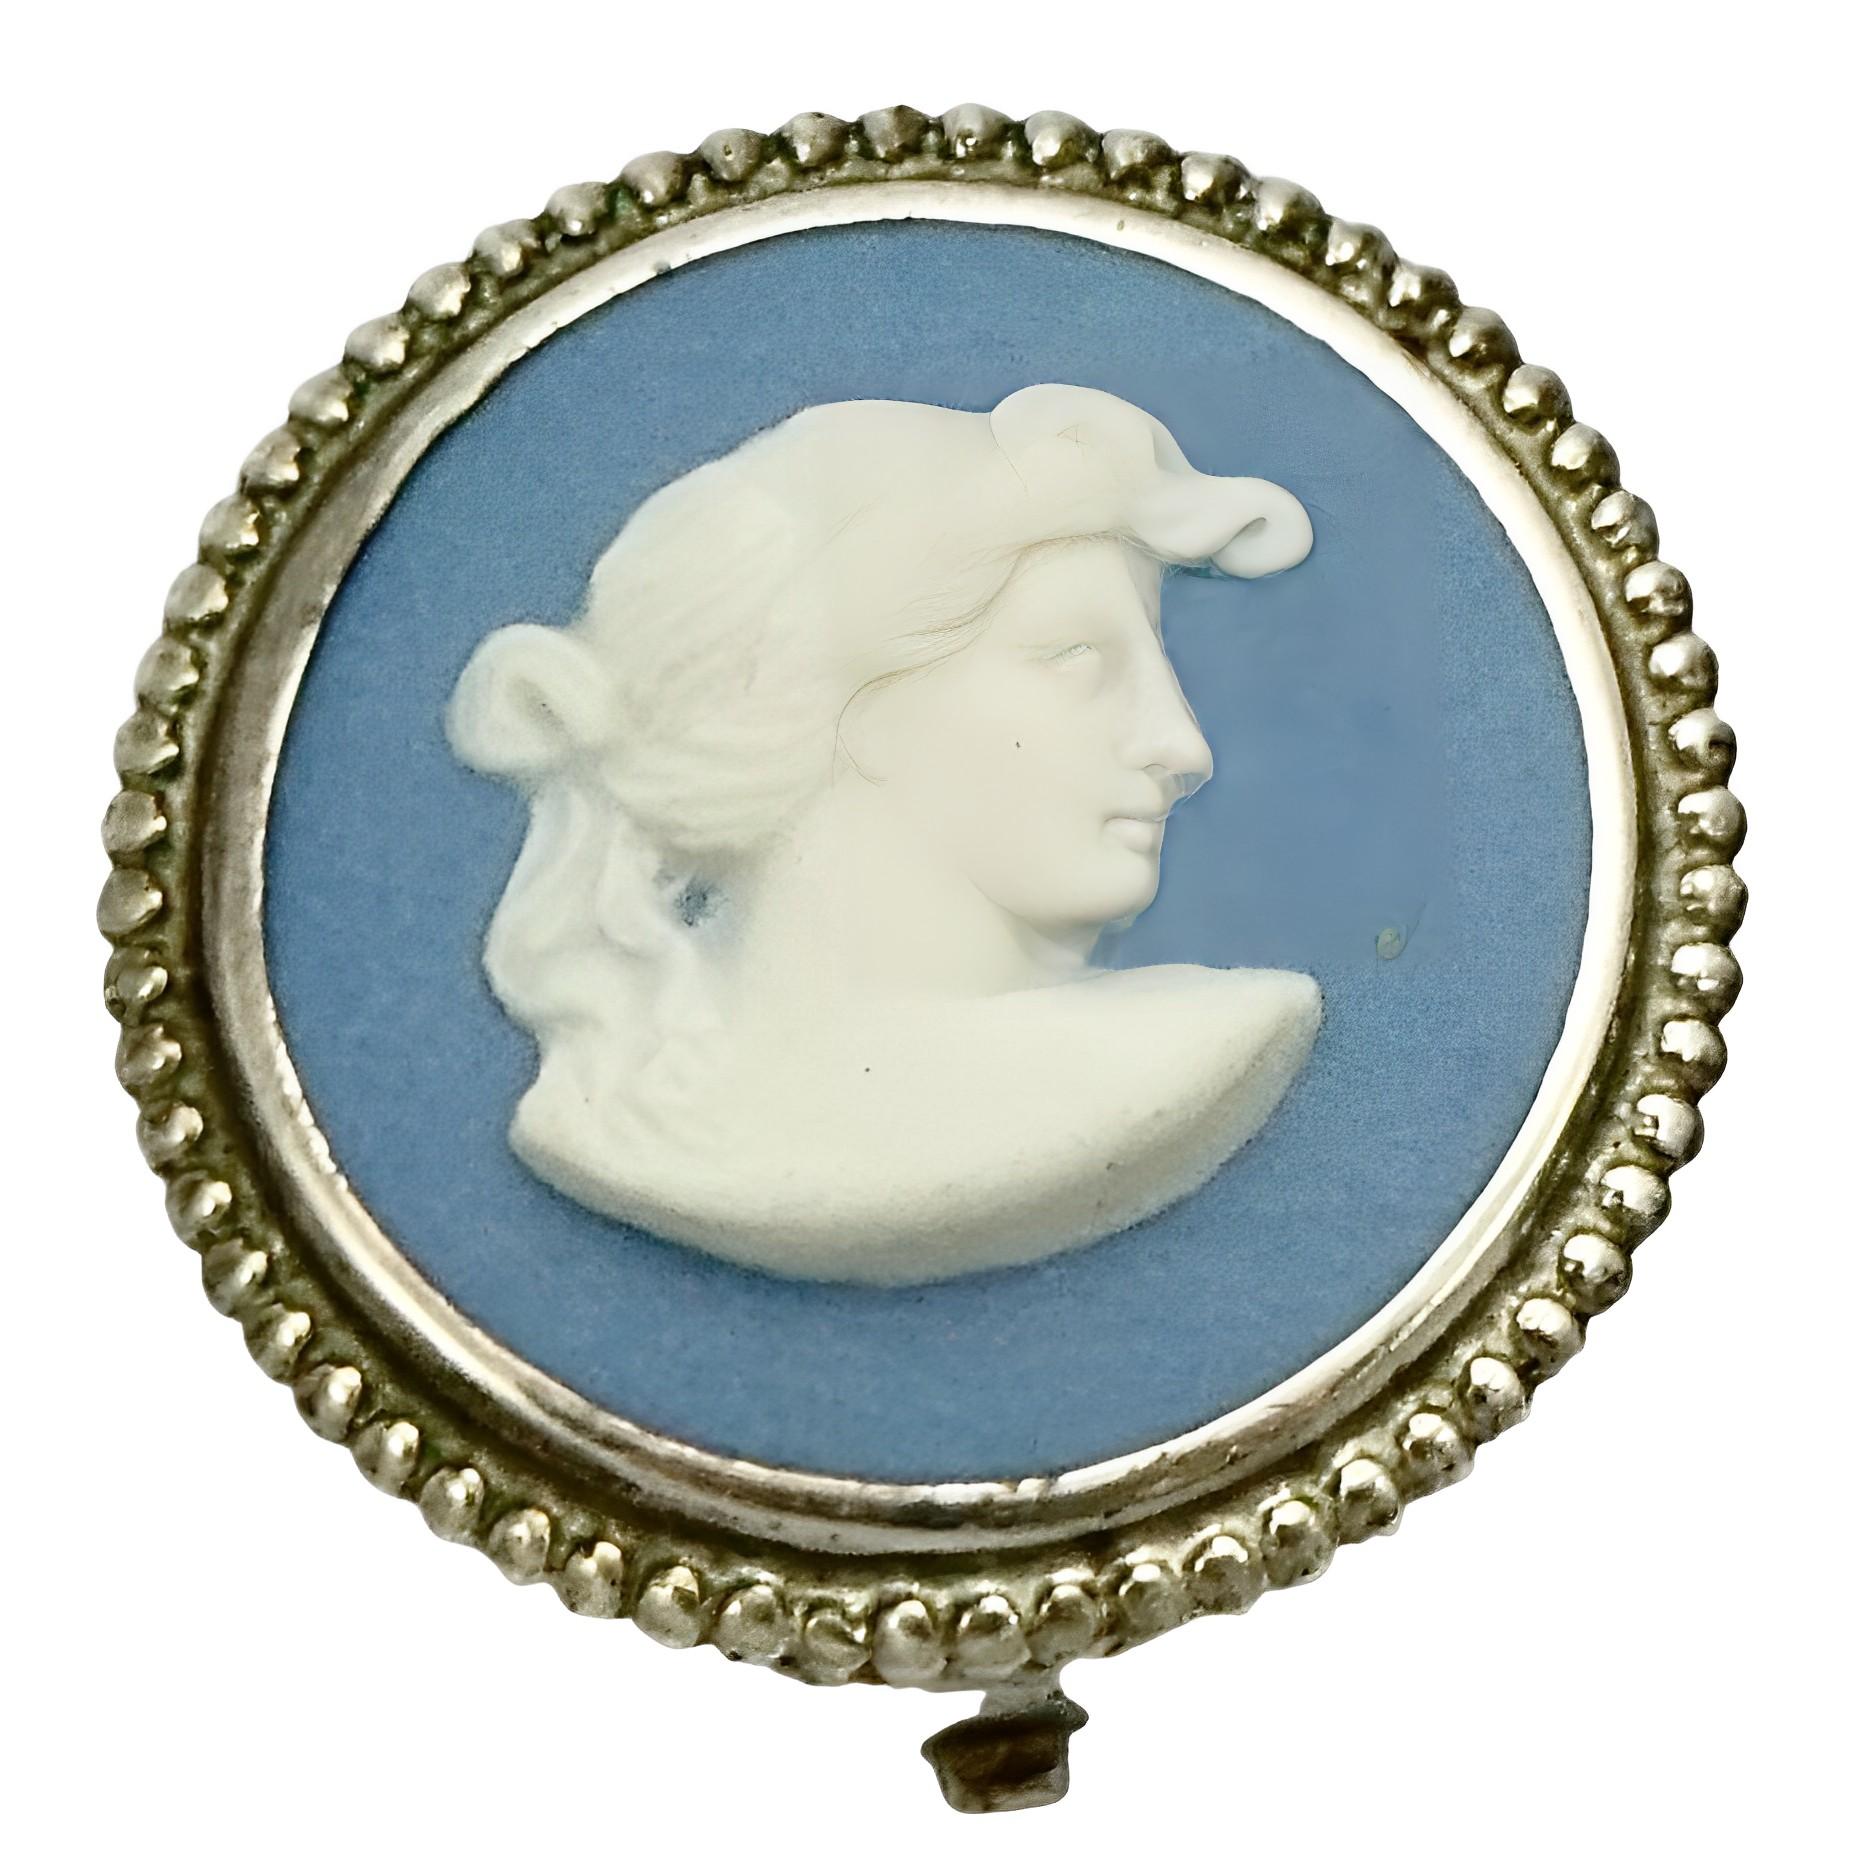 Wedgwood sterling silver and blue jasperware earrings, featuring classical relief ladies. Measuring diameter 2.2 cm / .86 inch. The silver is stamped SILVERJW, and SILVERFAW, which is the hallmark of F. A. Welch, the Liverpool jeweller who set